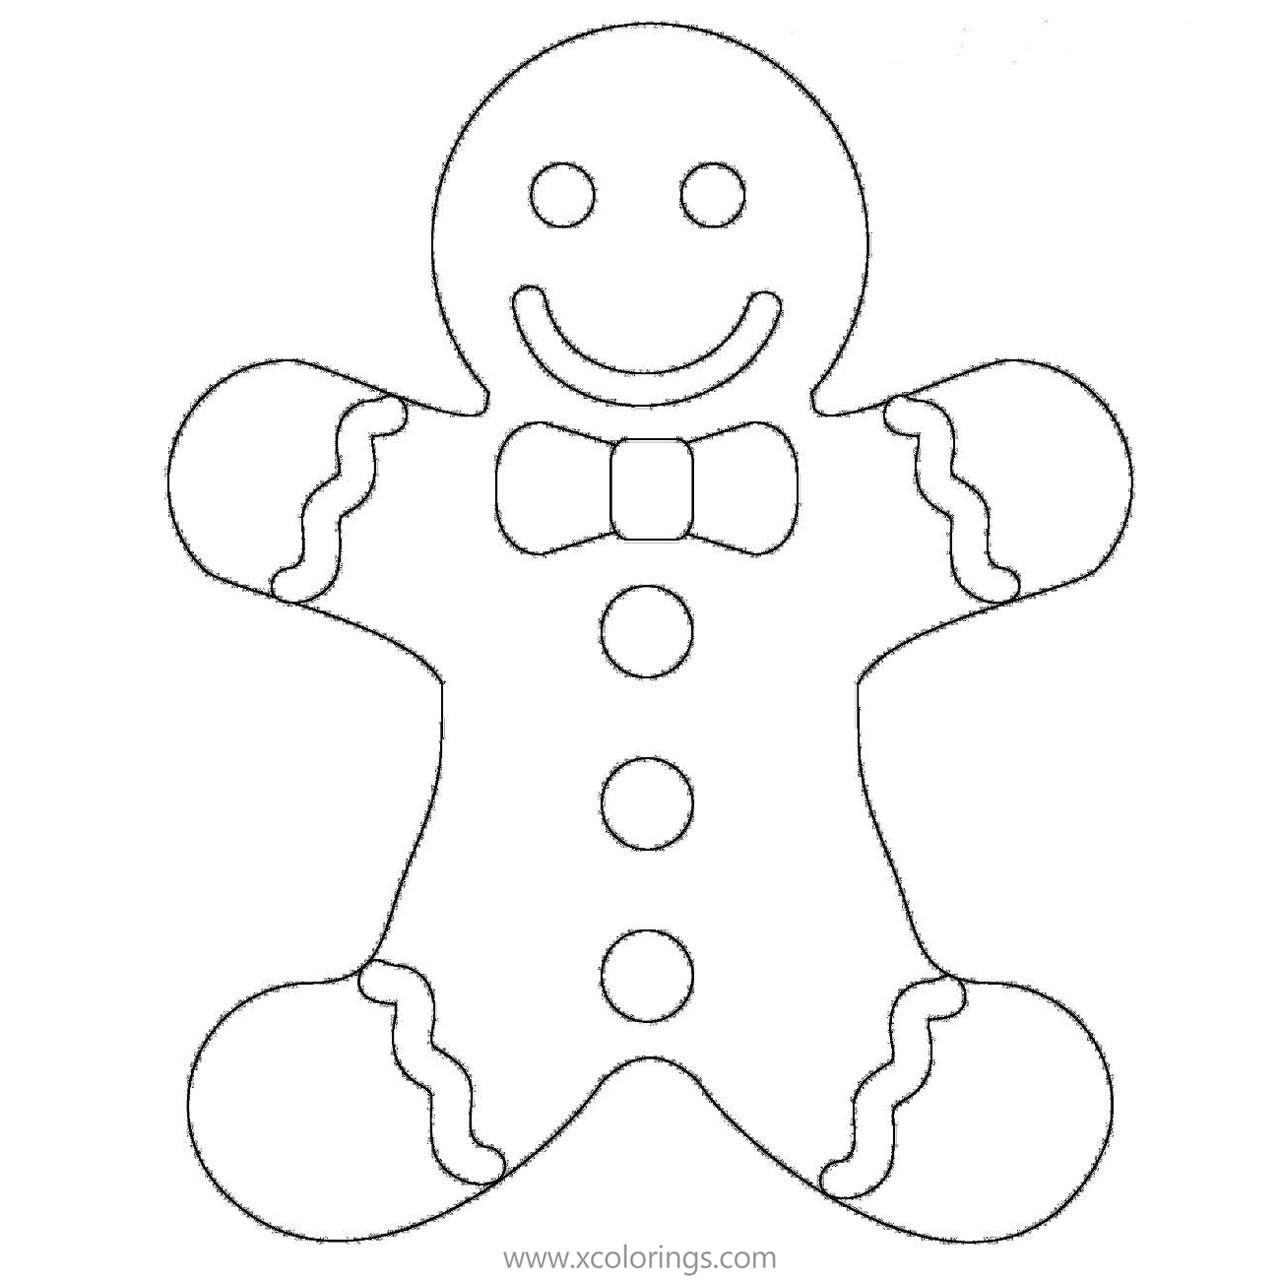 Free Easy Gingerbread Man Coloring Pages printable